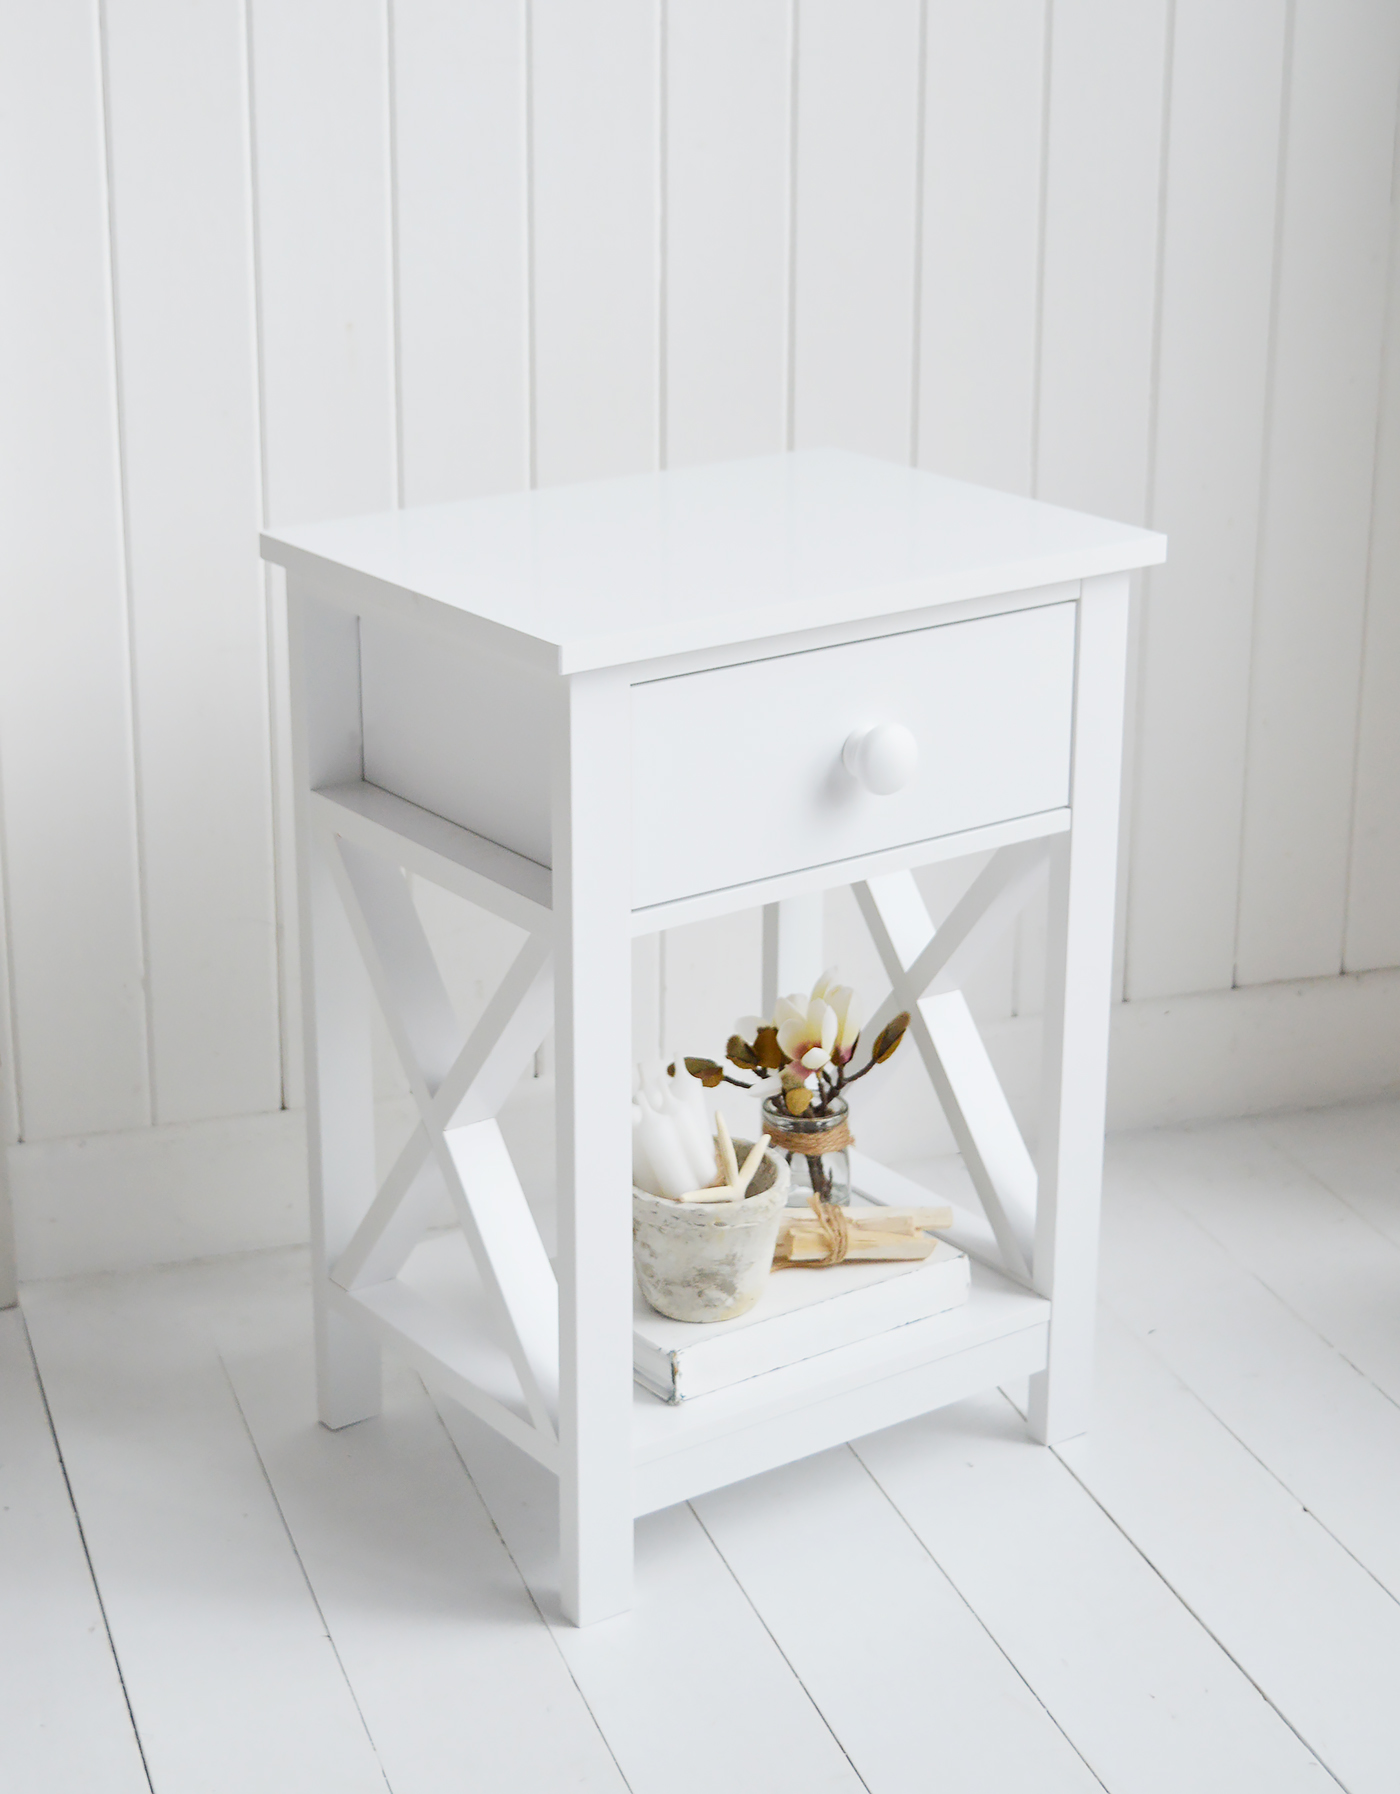 Bar Harbor white bedside table - New England Coastal and Modern Country Furniture. Lamp table with drawer and shelf - living room lamp table